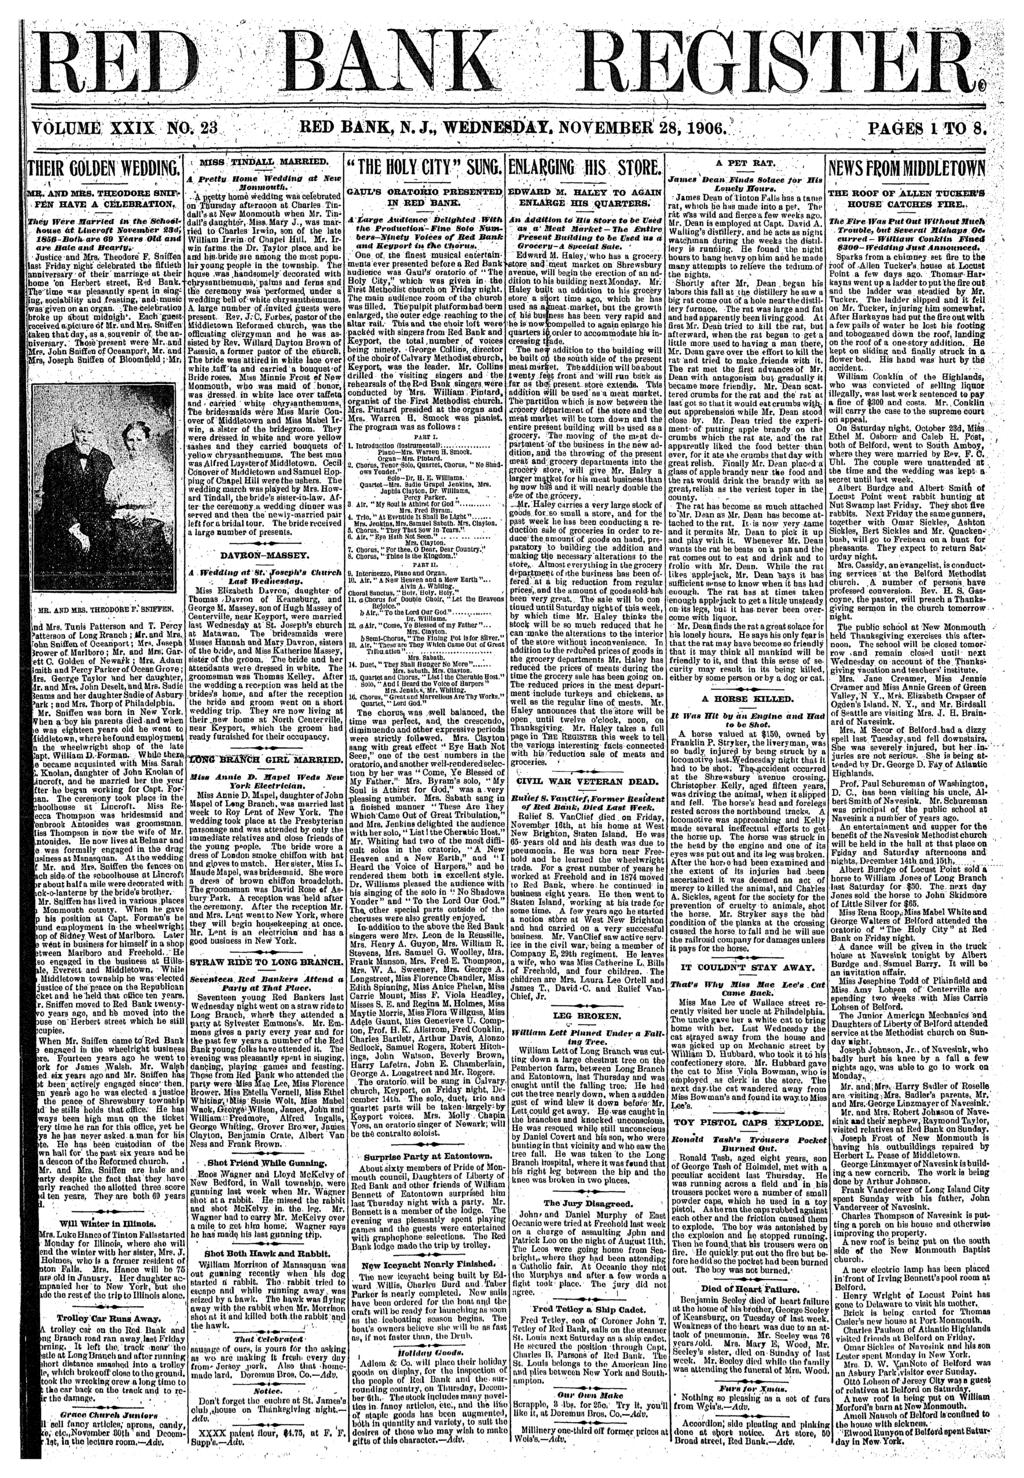 VOLUME XXIX NO. 23 RED BNK, N. J M WEDNESDY. NOVEMBER 28,1906. PGES I TO 8. THEIR GOLDEN WEDDING; y\ - :. "»., MB. ND IRS. THEODORE SNTF,- FEW HTE CELEBRTION, / Were Harret!